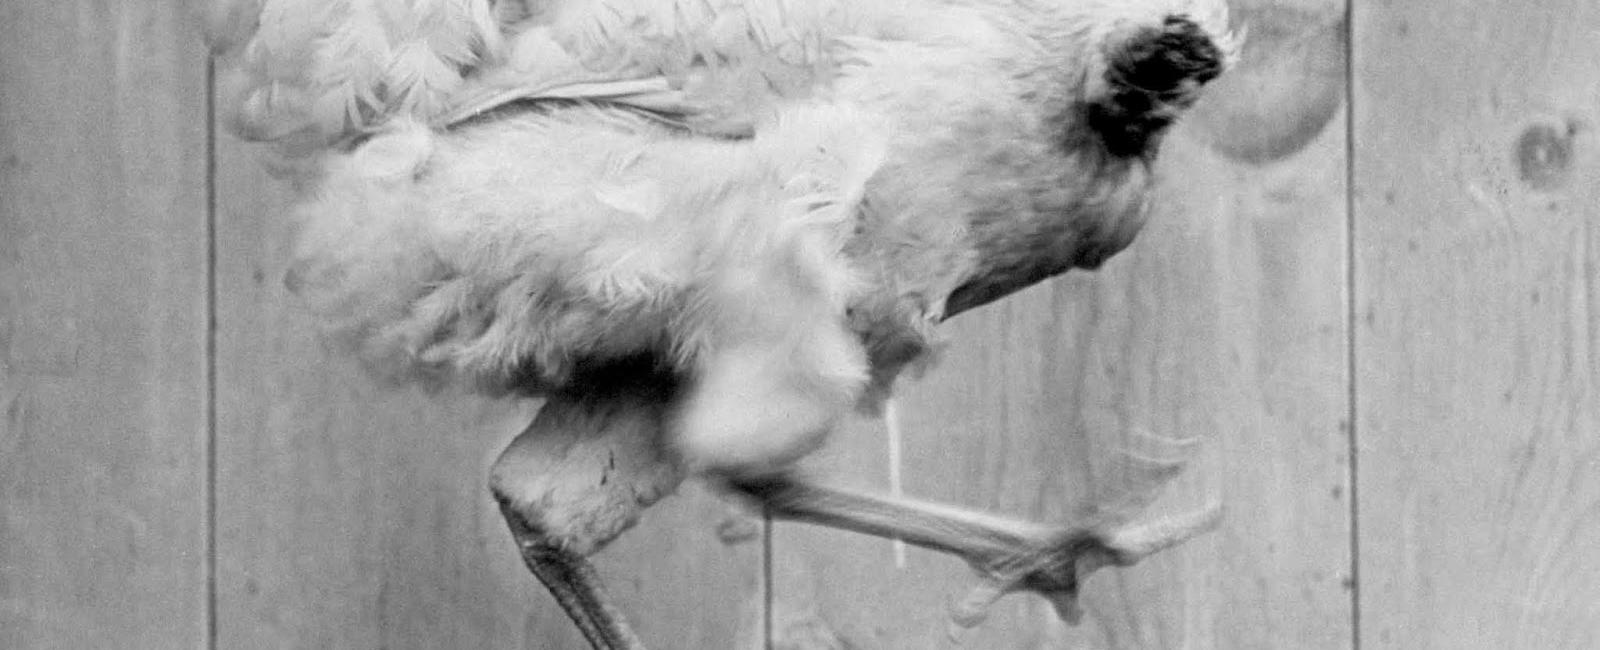 In 1945 a rooster named mike lived 18 months without a head